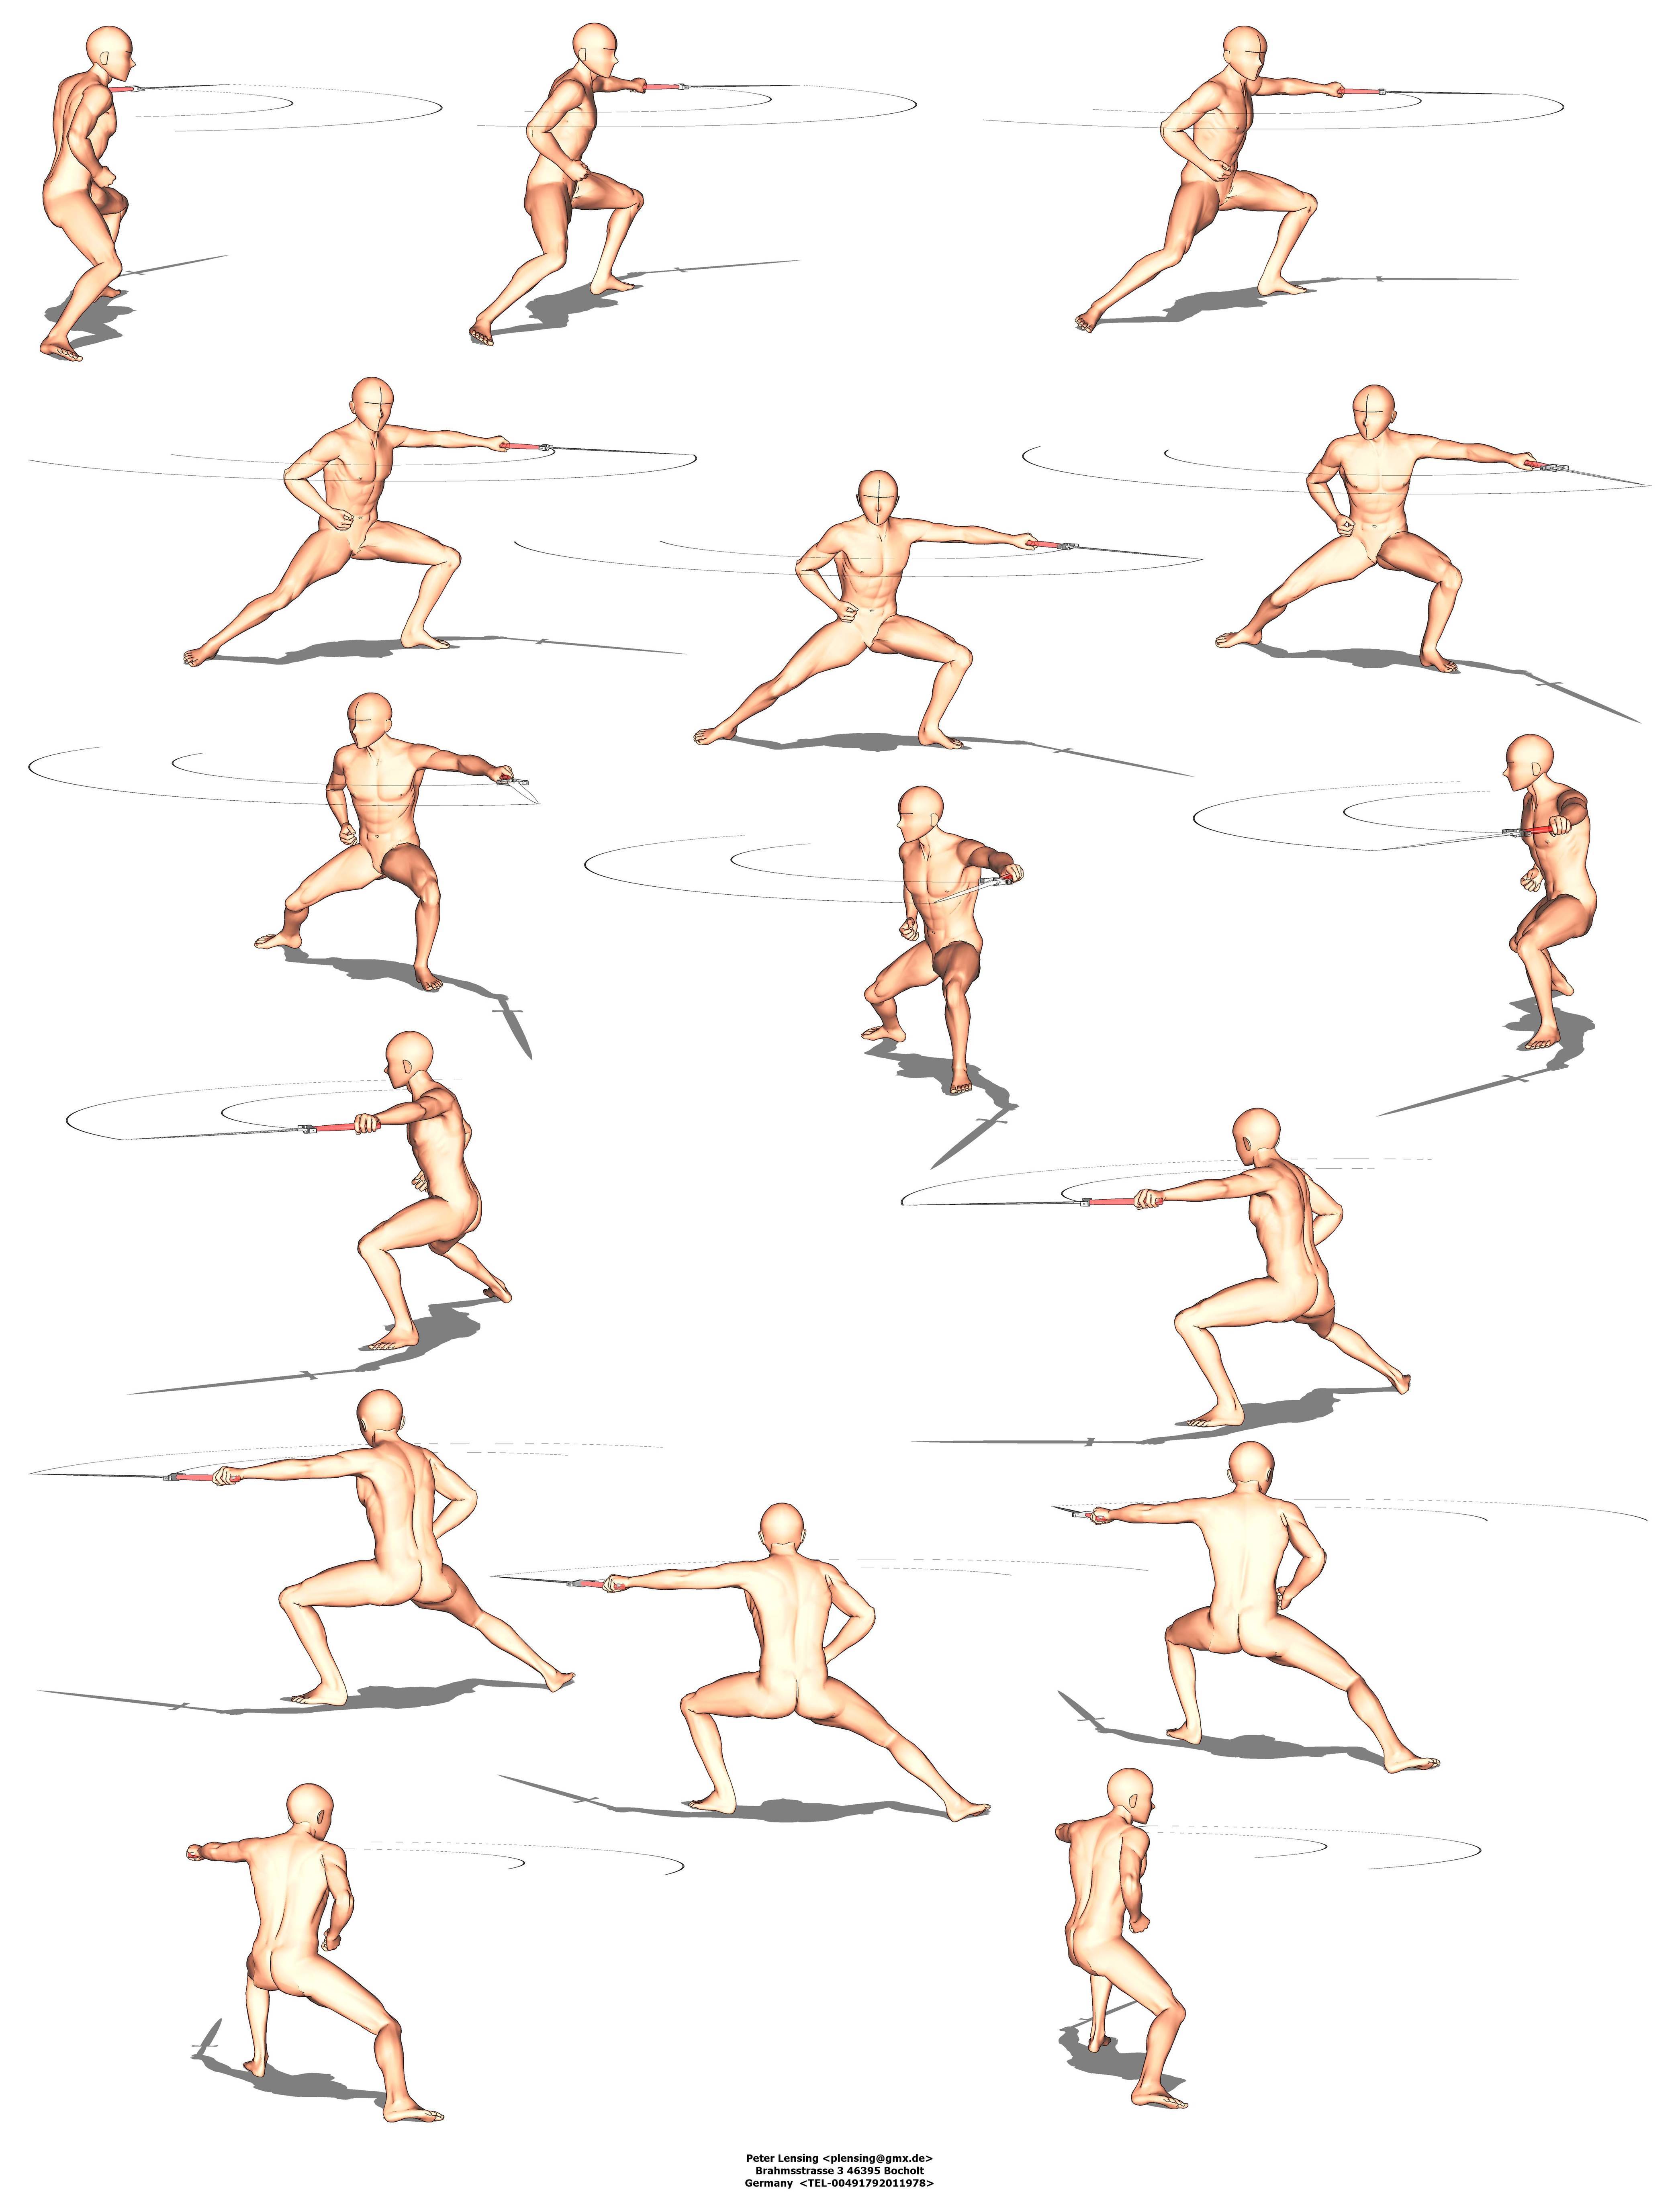 Action pose sketches using Dream! Maybe I should do fighting poses next 👀  : r/DreamWasTaken